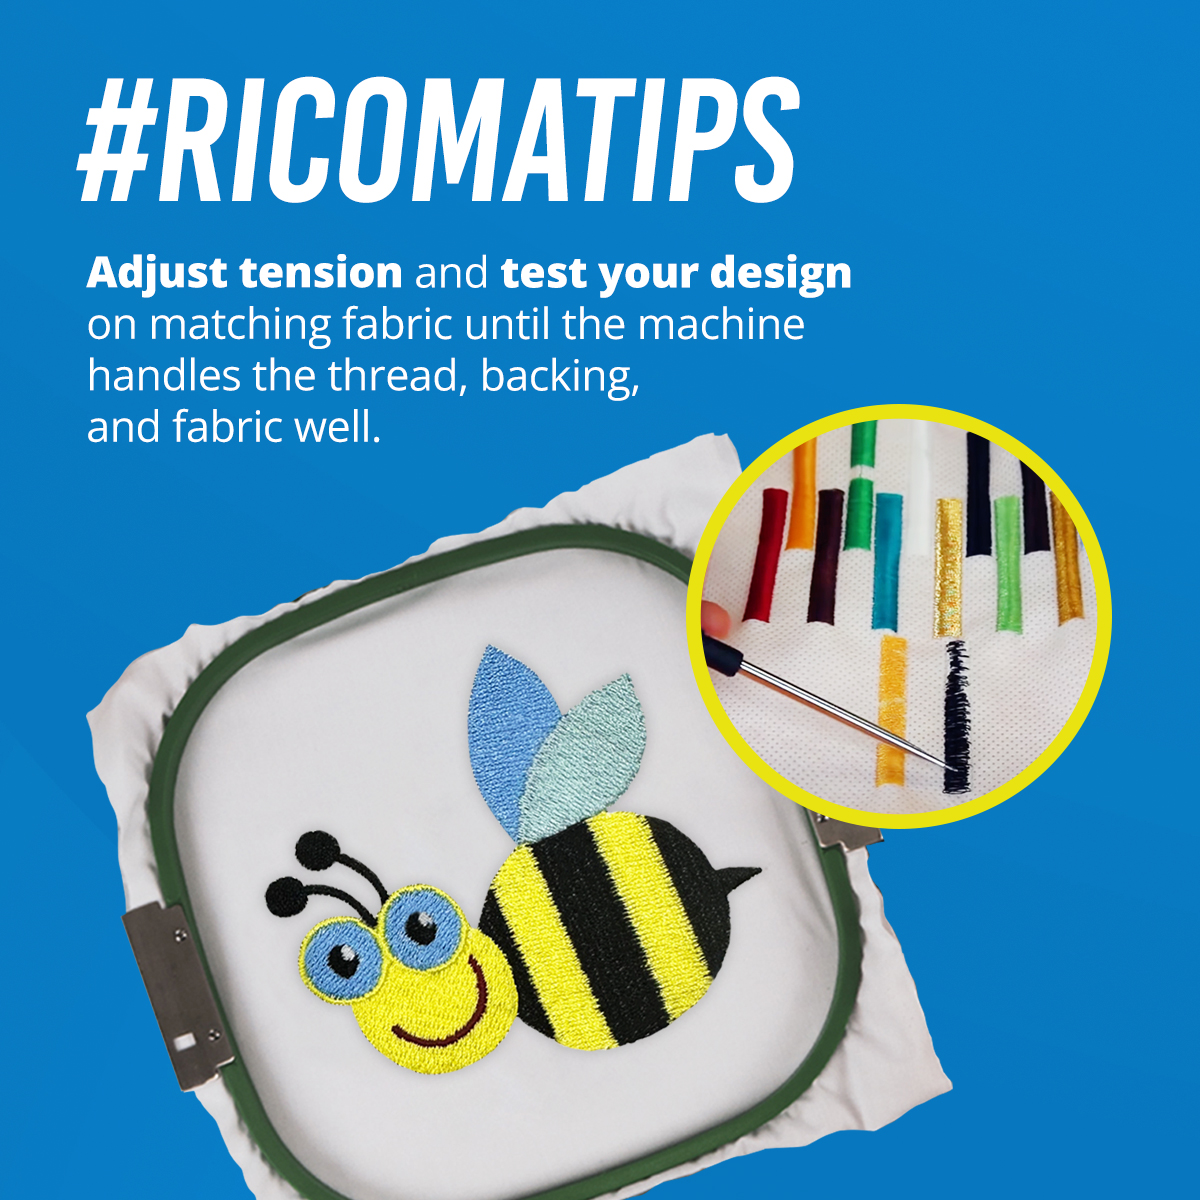 Making the most of each Tuesday with some helpful #RicomaTips 💡💯 #TipTuesday #EmbroideryTips  
.
Share this tip with a fellow apparel decorator! 
.
.
#RicomaInternational #Embroidery #CustomApparel #Entrepreneurs #Ricoma #Customize #EmbroideryTips #EmbroideryTension